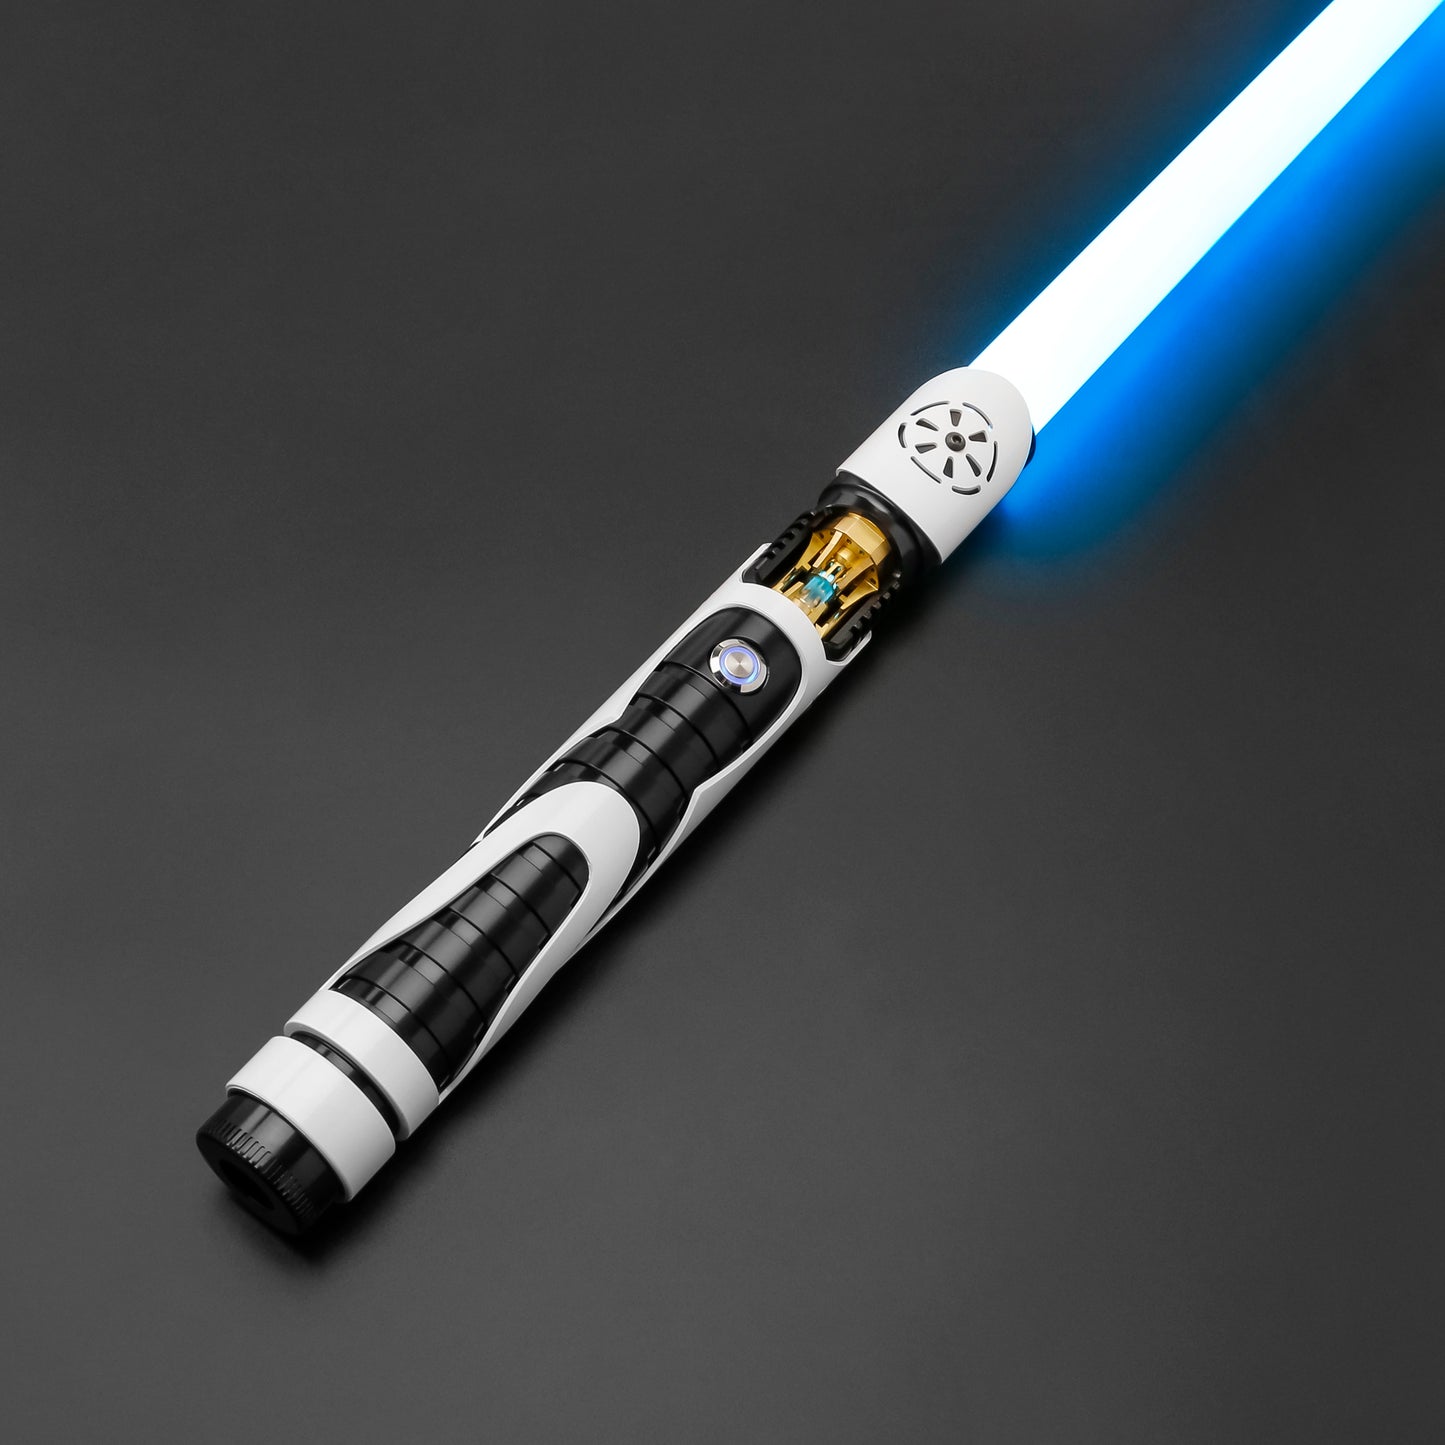 Soldiers Lightsaber